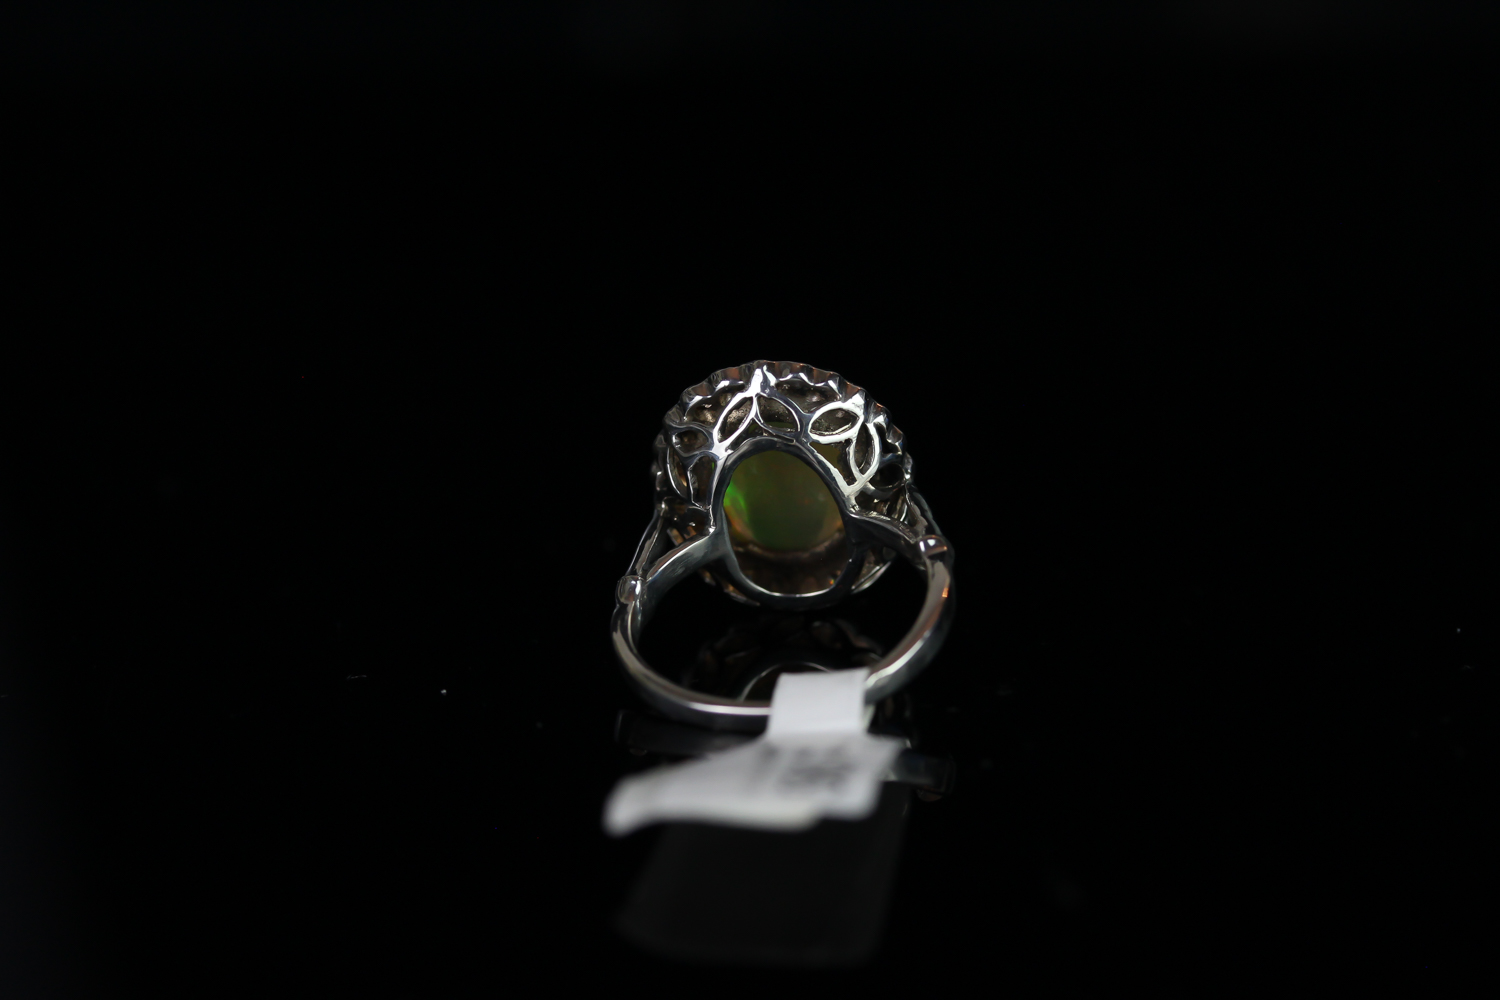 18k OPAL AND DIAMOND CLUSTER RING,centre stone estimated 12x11mm,estimated diamonds total 0.25ct, - Image 3 of 3